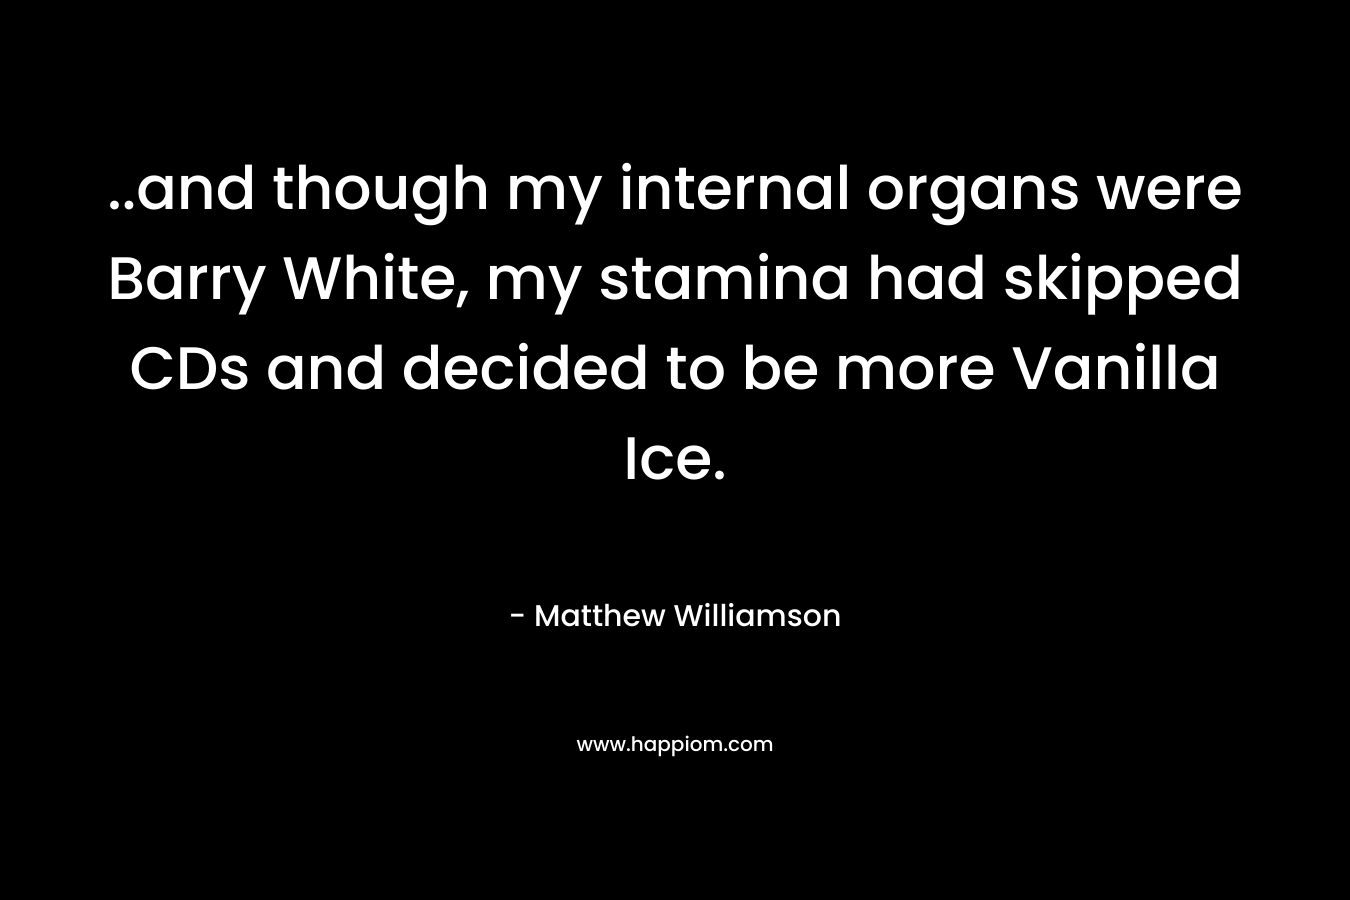 ..and though my internal organs were Barry White, my stamina had skipped CDs and decided to be more Vanilla Ice.